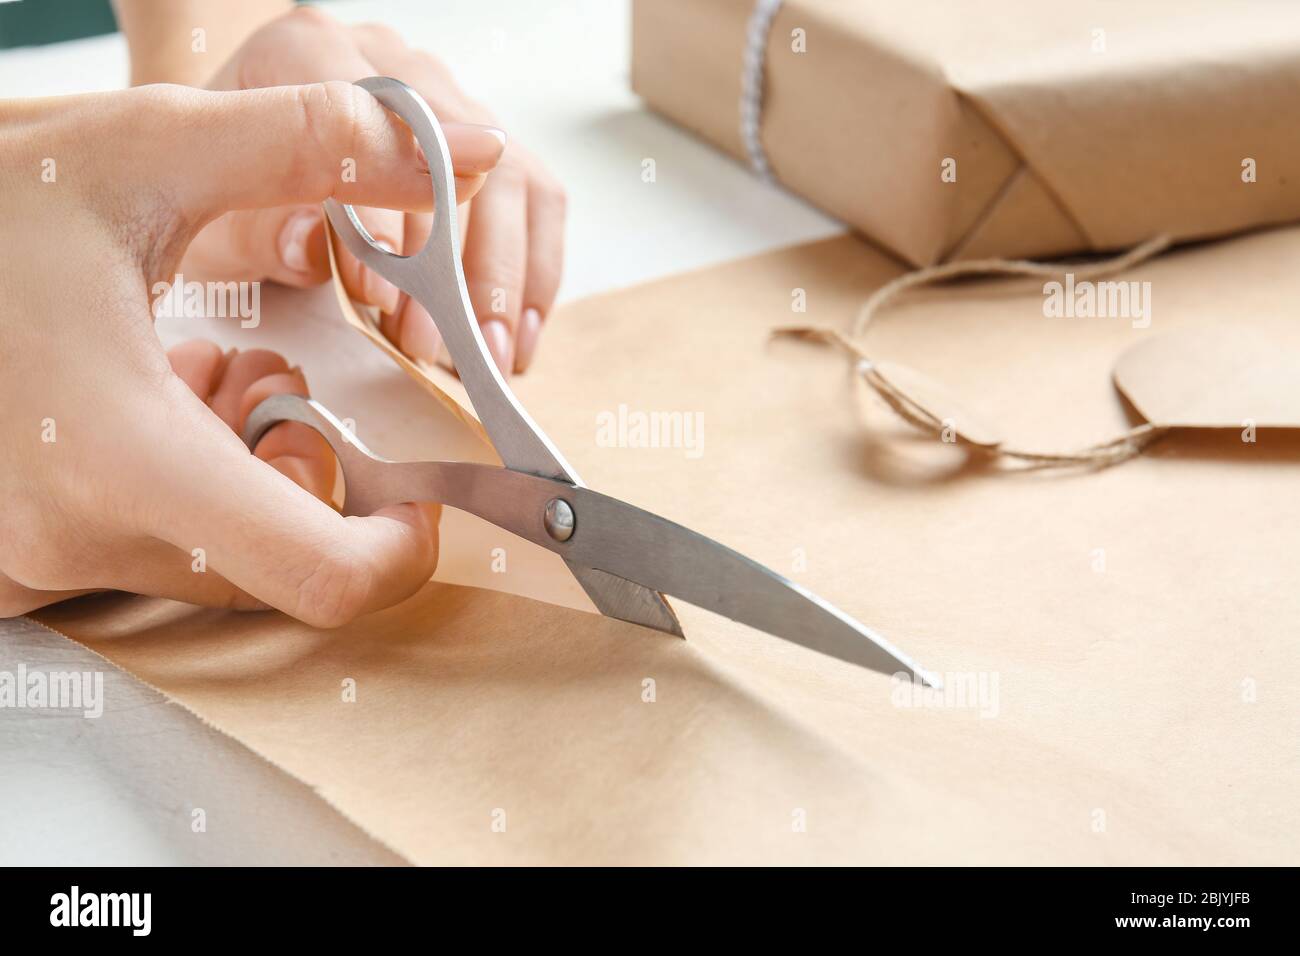 Premium Photo  Closeup image of girl cutting red wrapping paper for  christmas presents